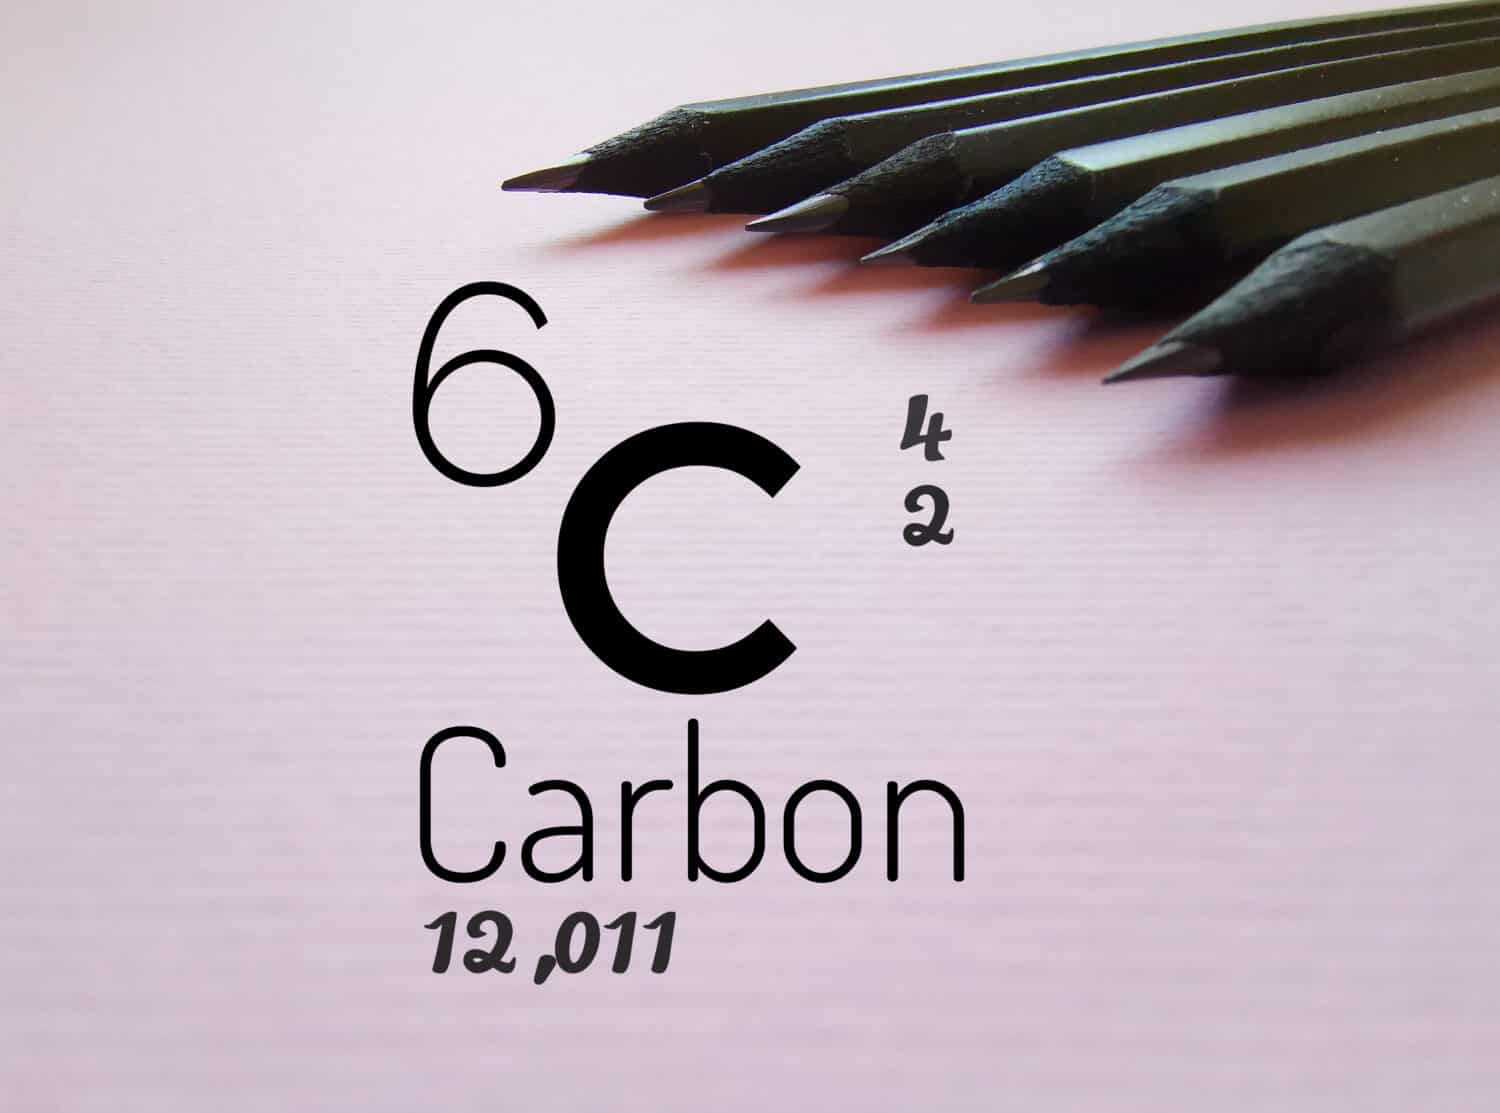 Carbon is a chemical element of the periodic table. Symbol for the chemical element carbon with atomic data (atomic number, mass and electron configuration) and graphite pencils in the background.